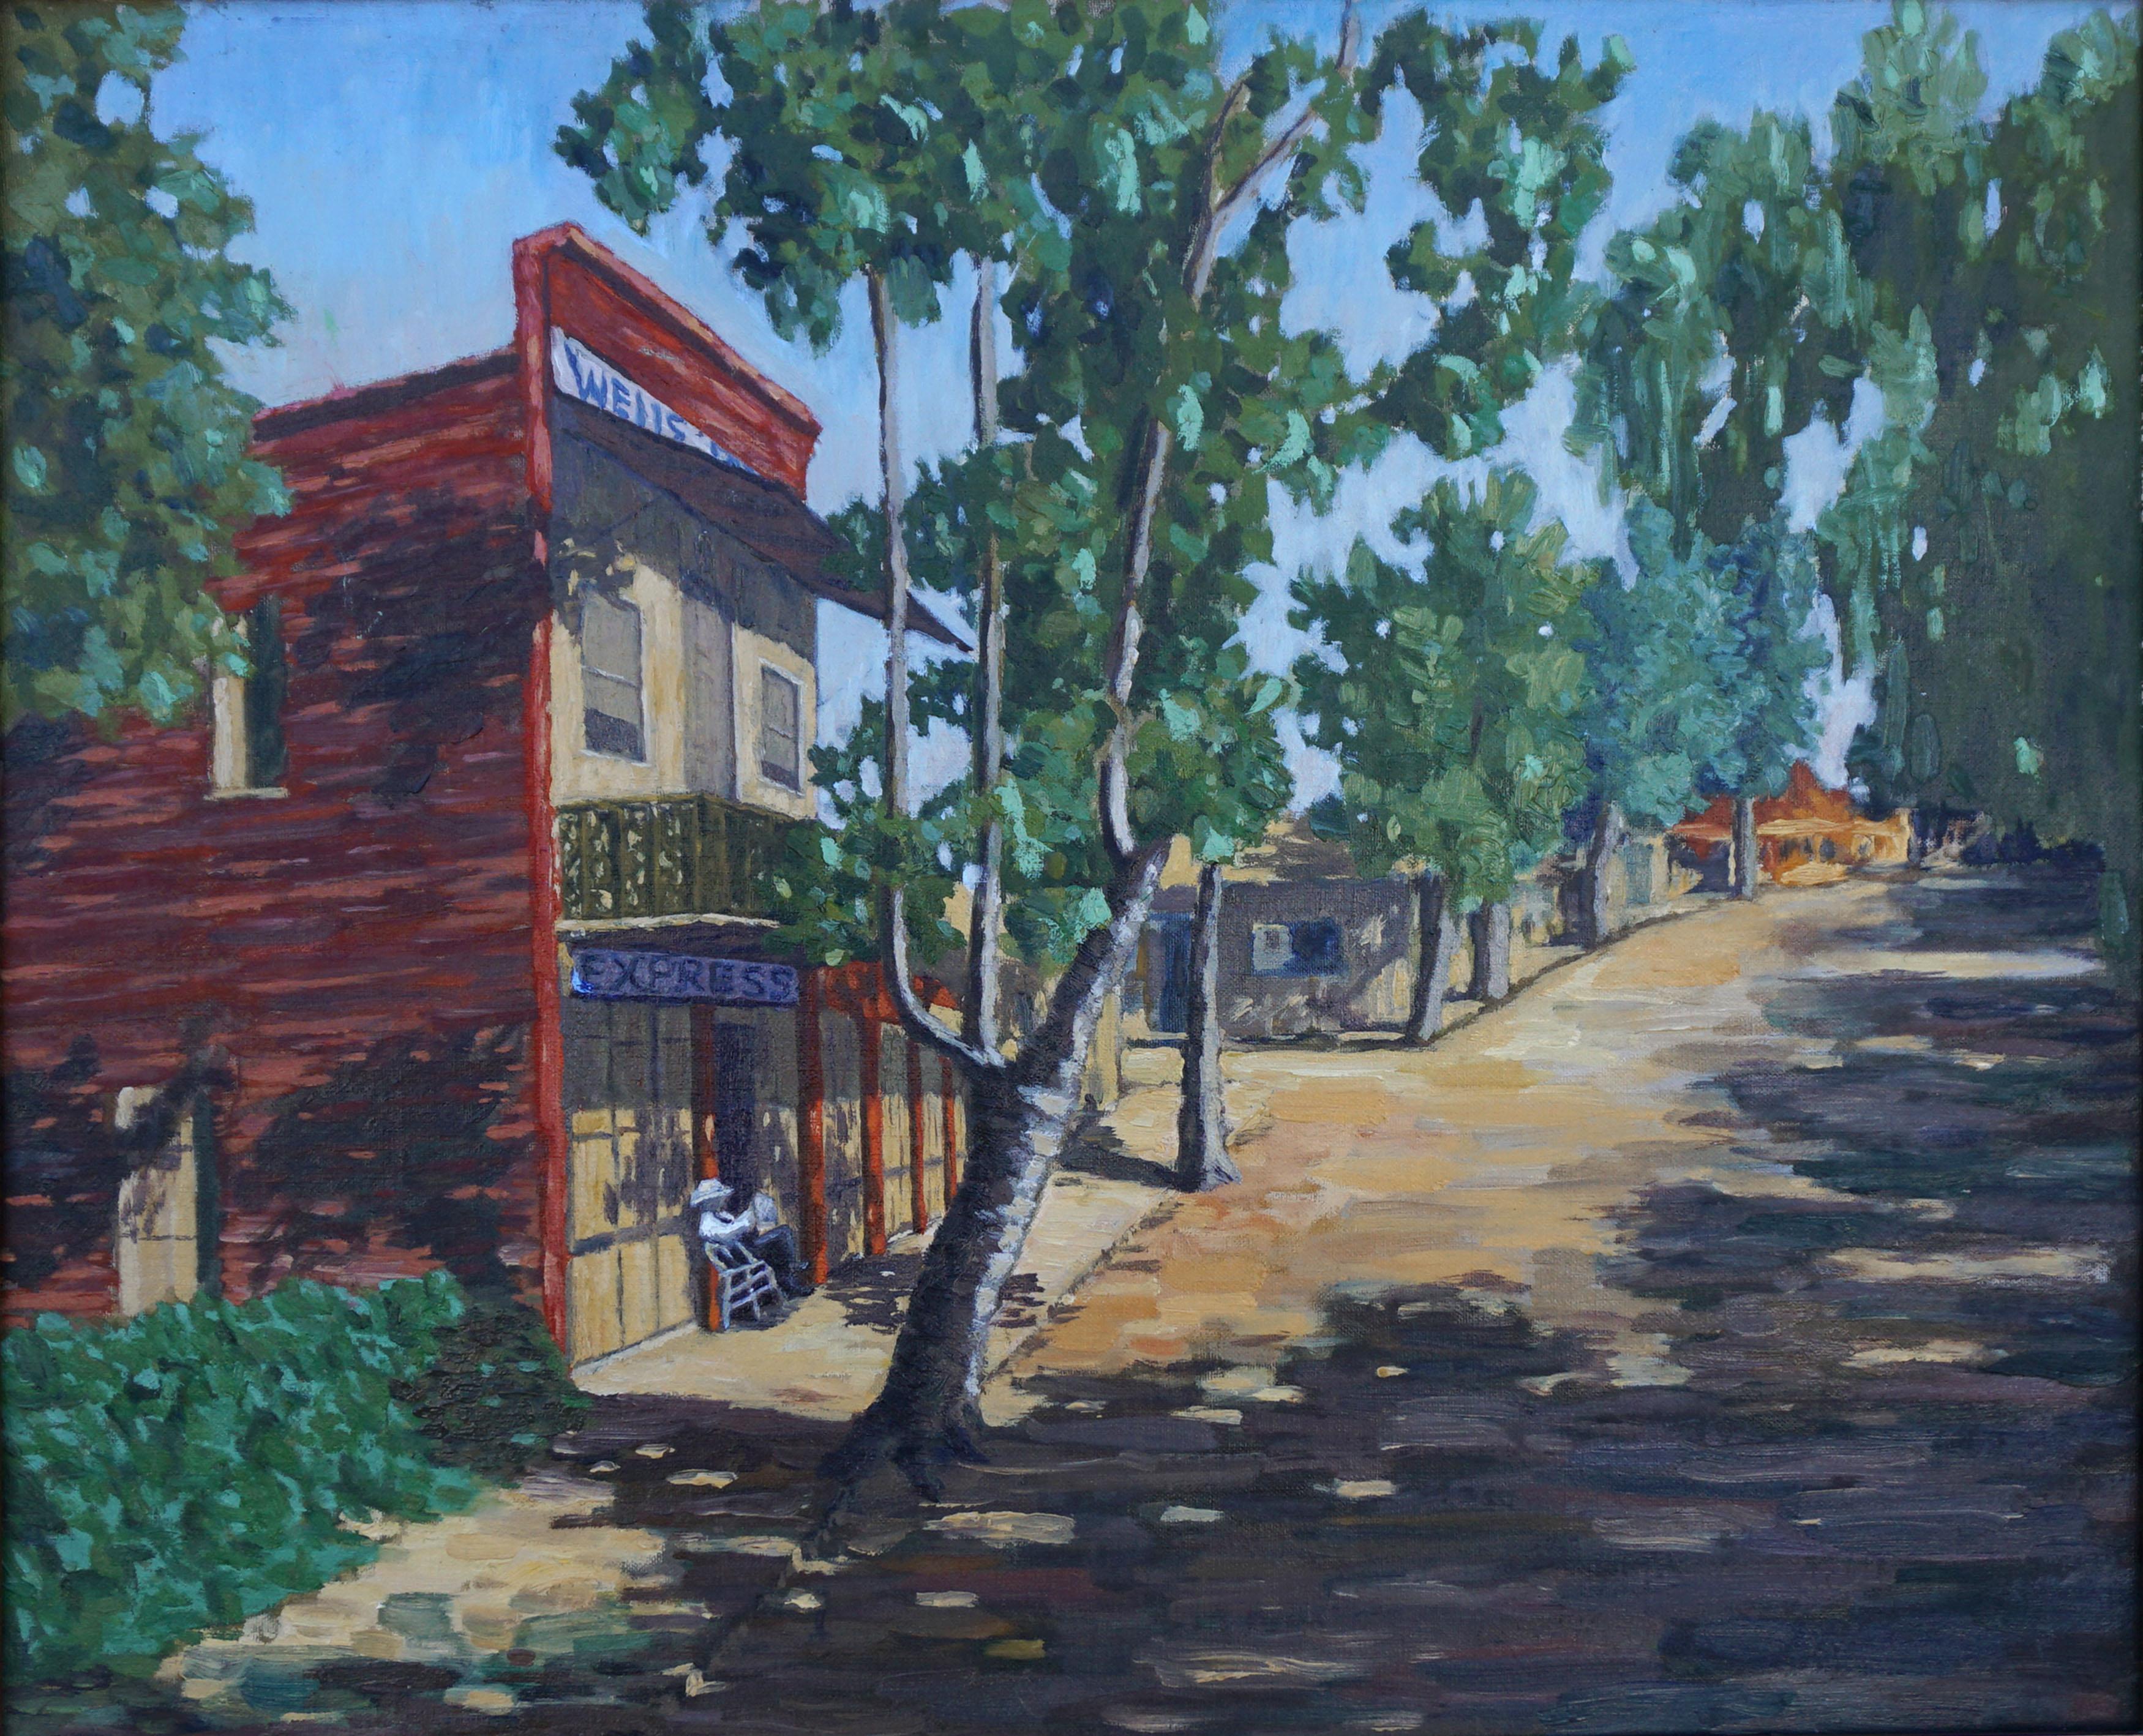 Wells Fargo Express, Gold Country -- Columbia, California  - Painting by Cecil F. Chamberlin